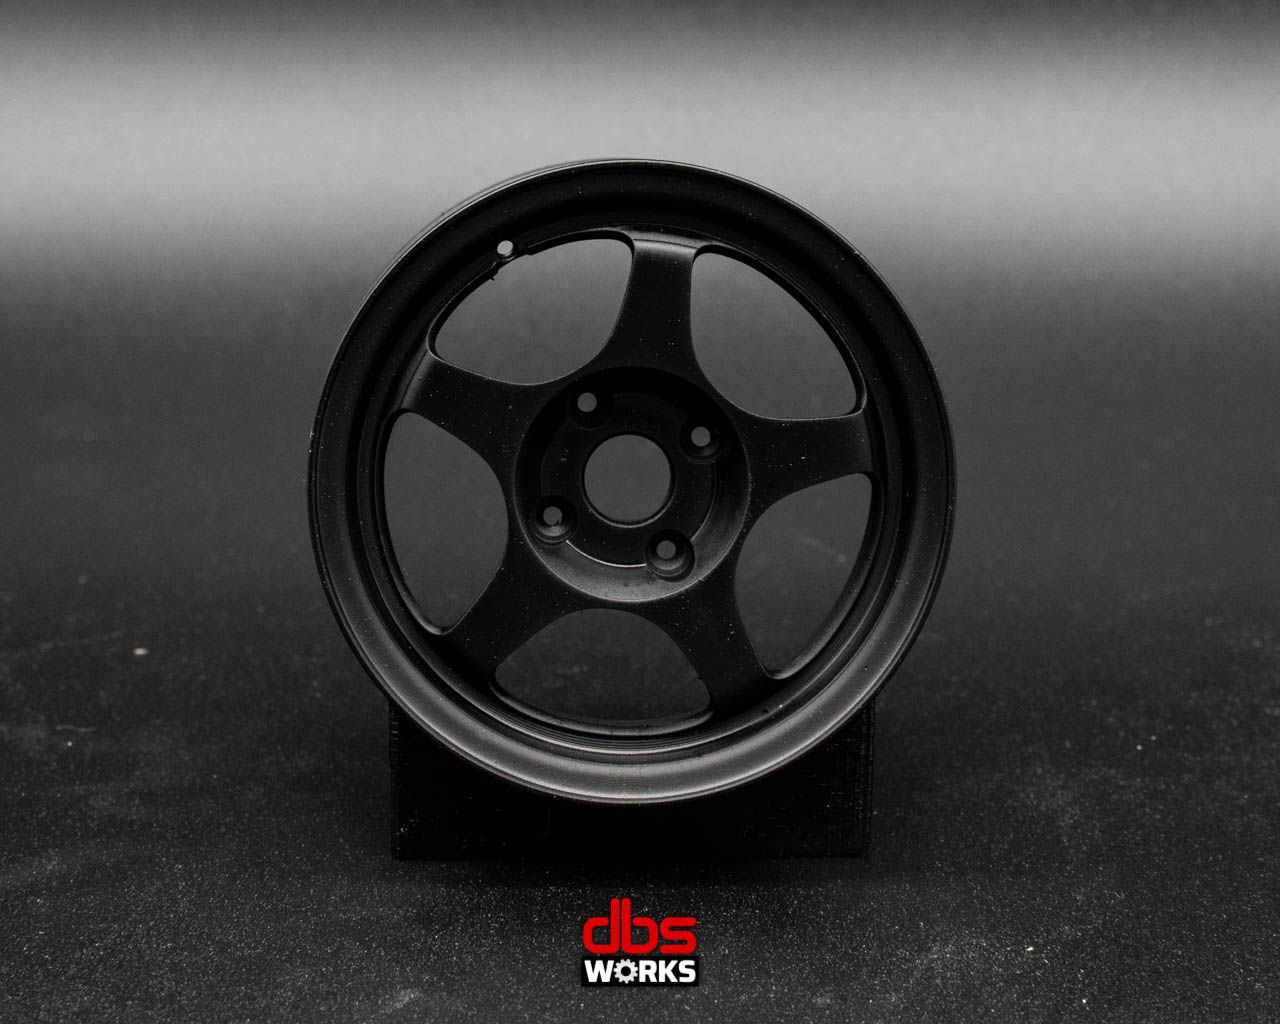 1/5 Spoon SW388 wheel with display case